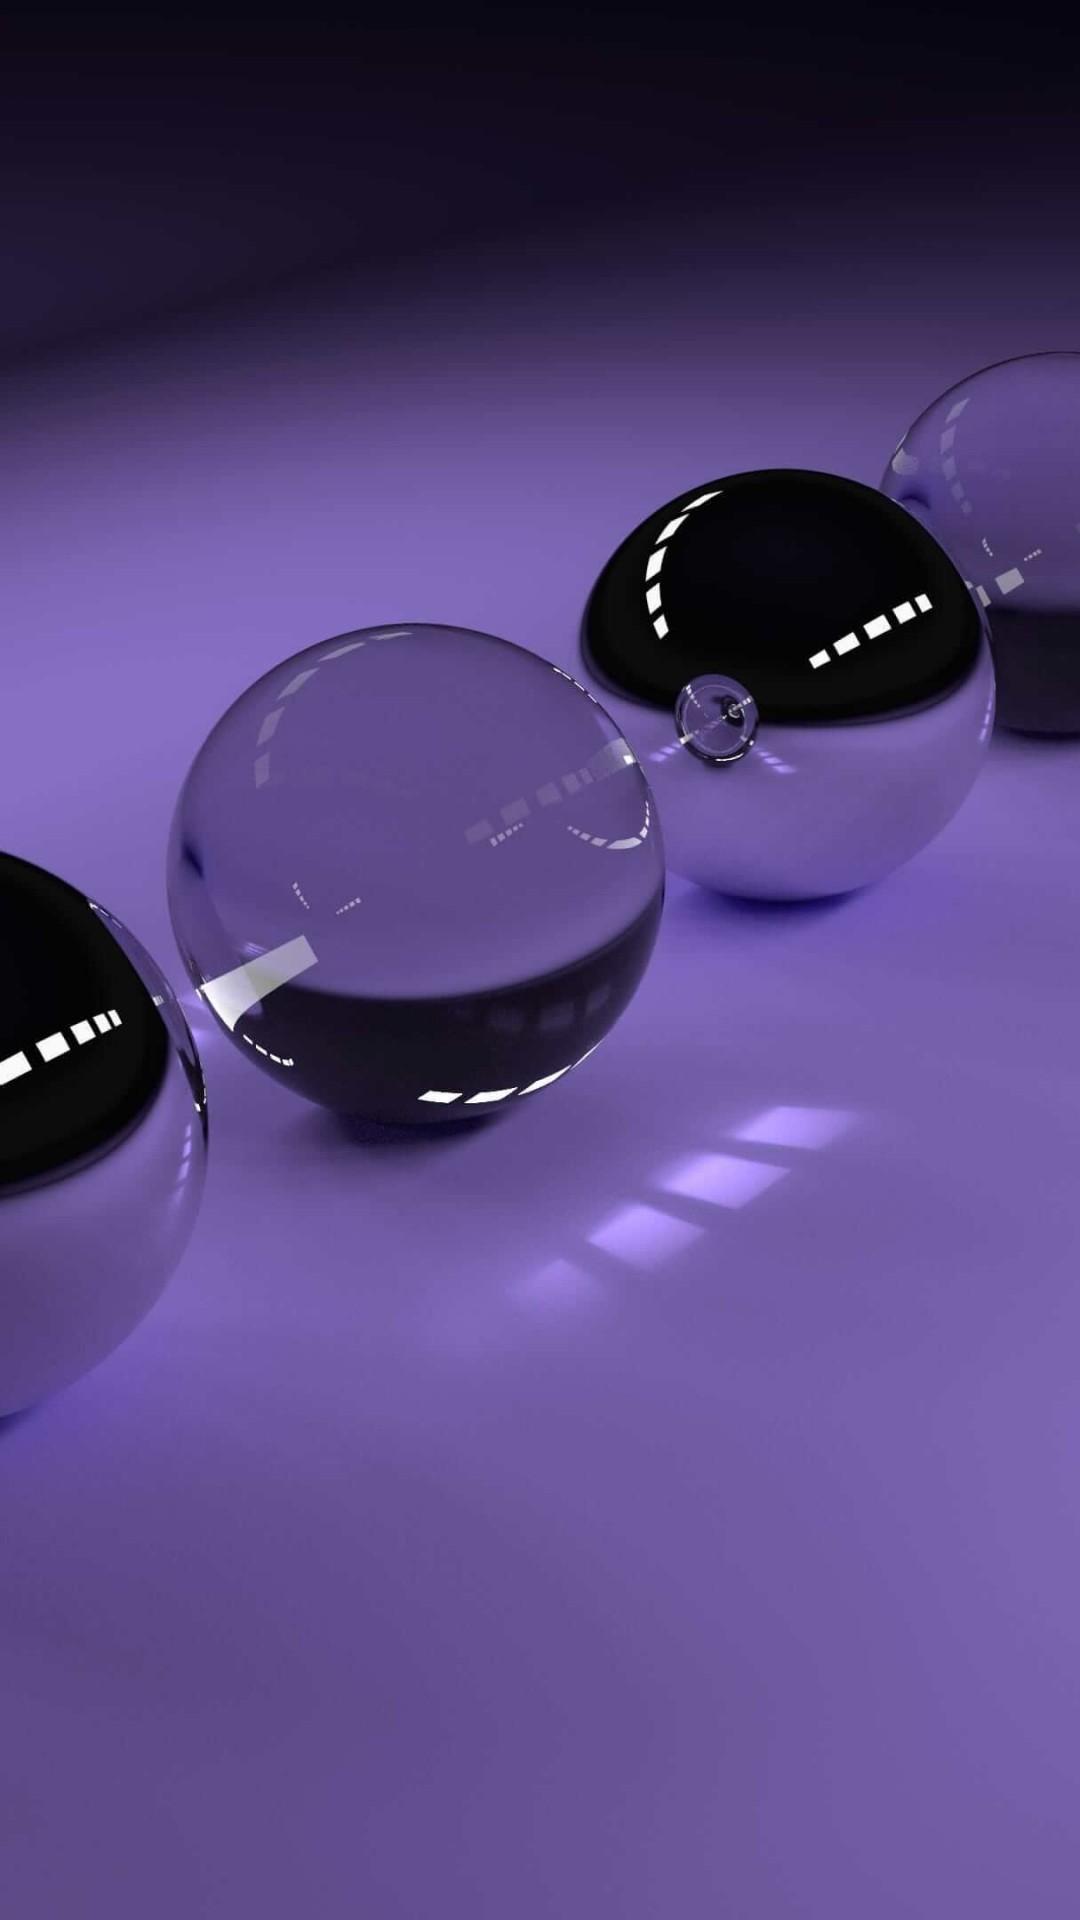 3D Glossy Spheres Wallpaper for SAMSUNG Galaxy S5